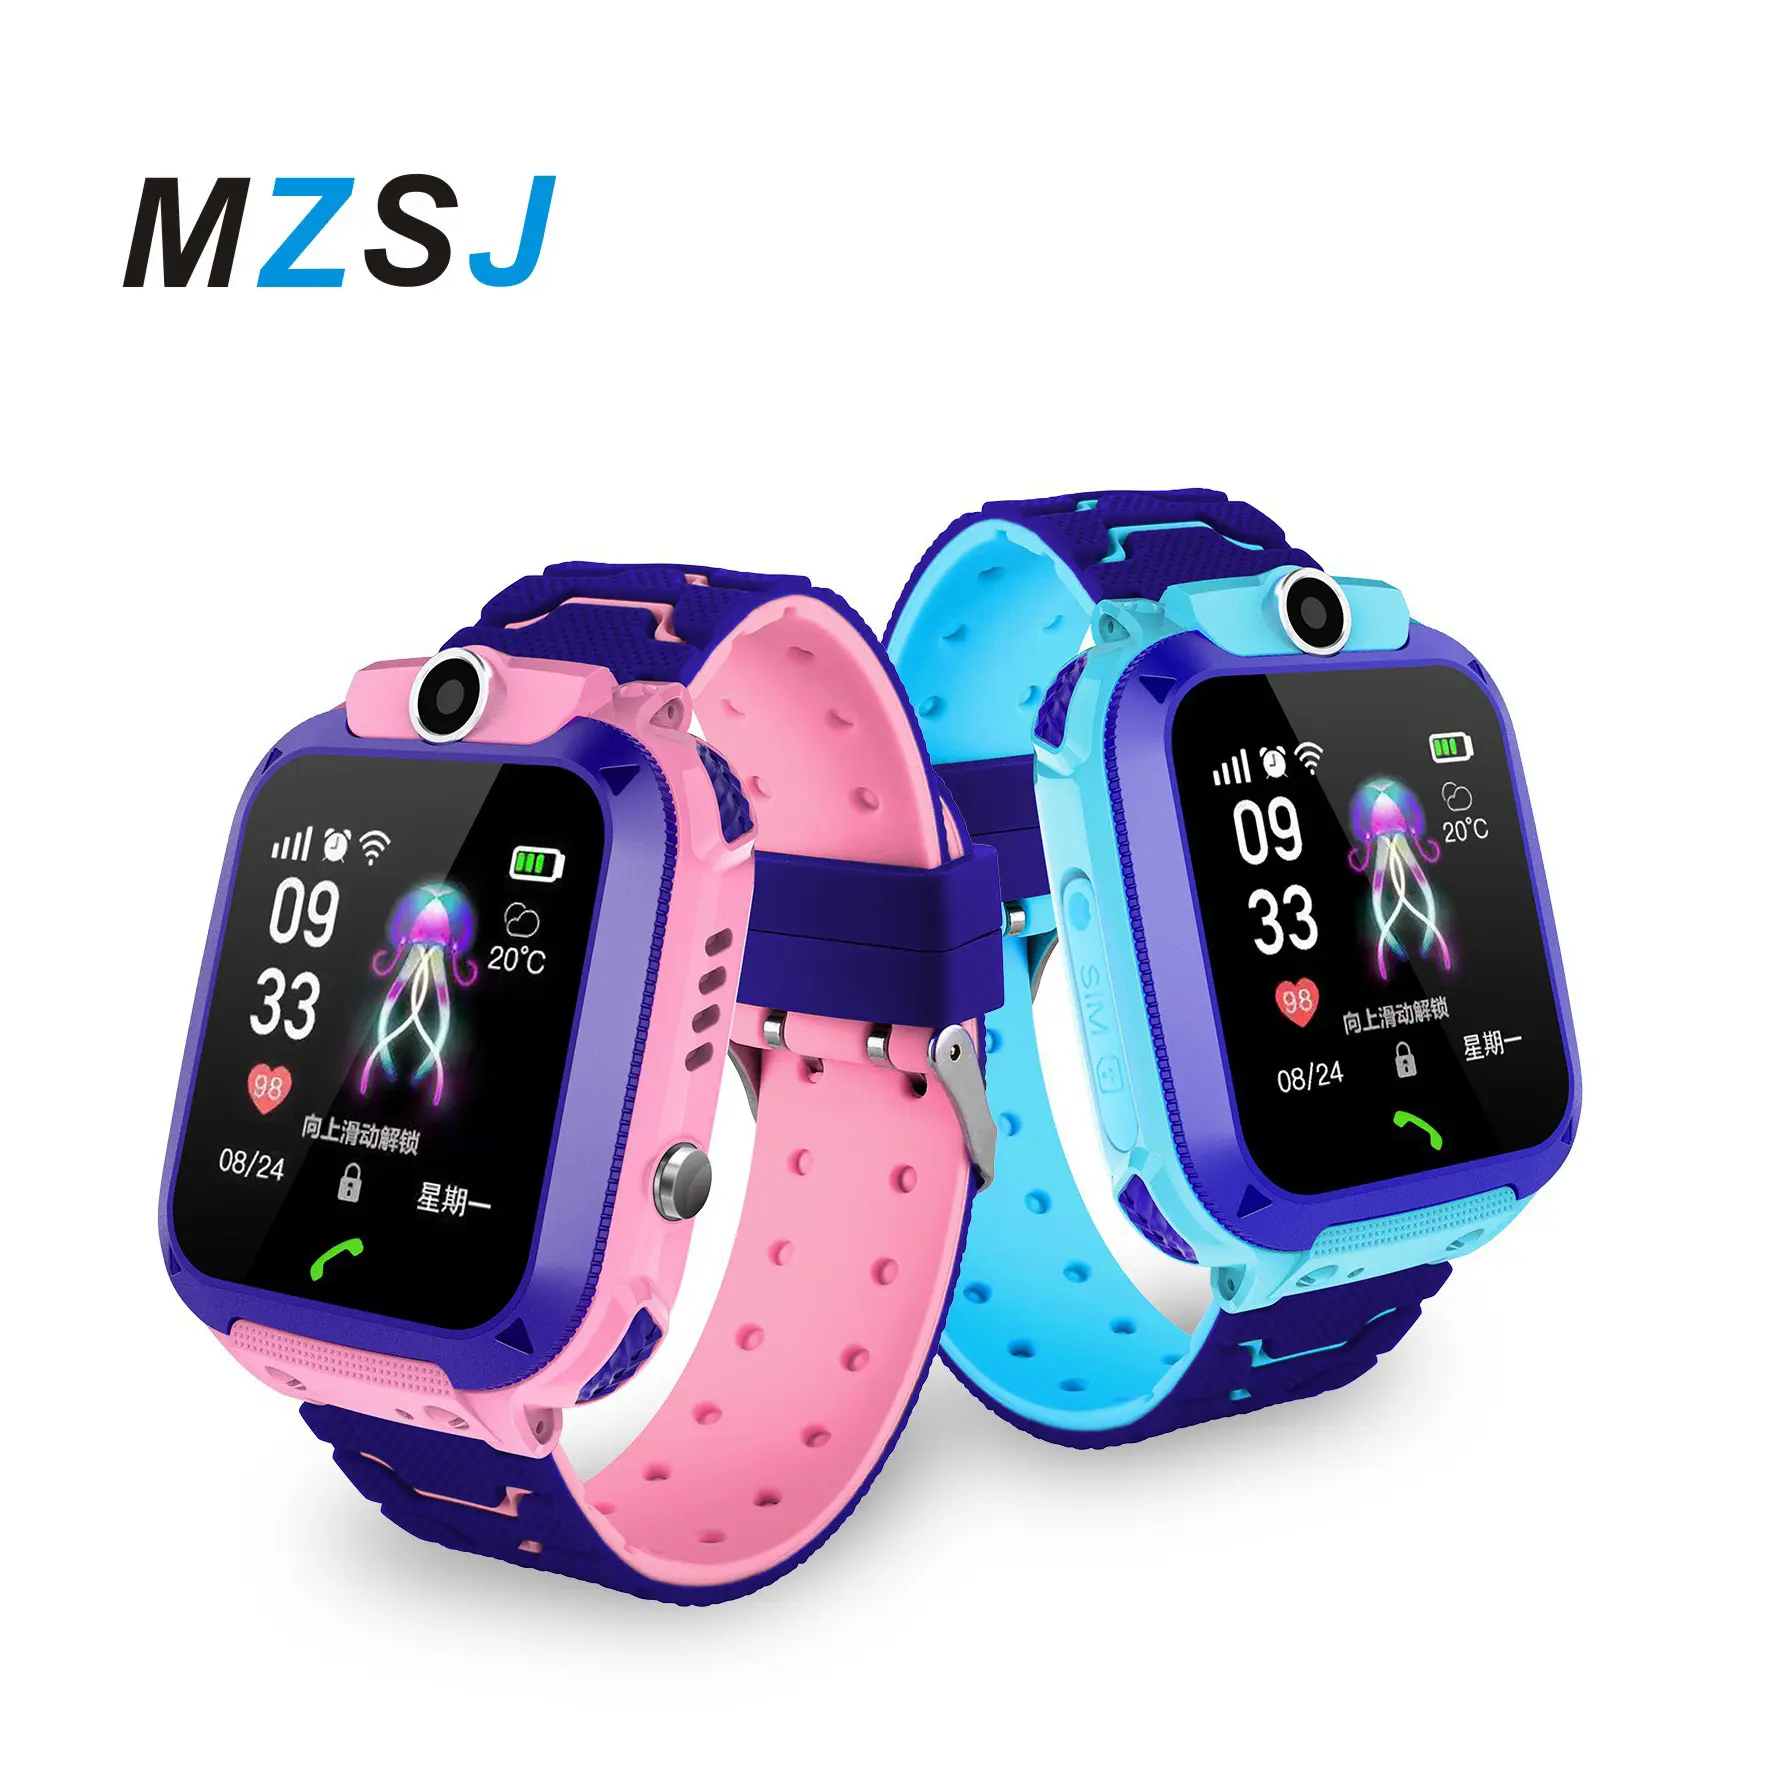 Spot foreign trade cross-border explosive language switch Q12B photo phase waterproof children's smart positioning phone watch